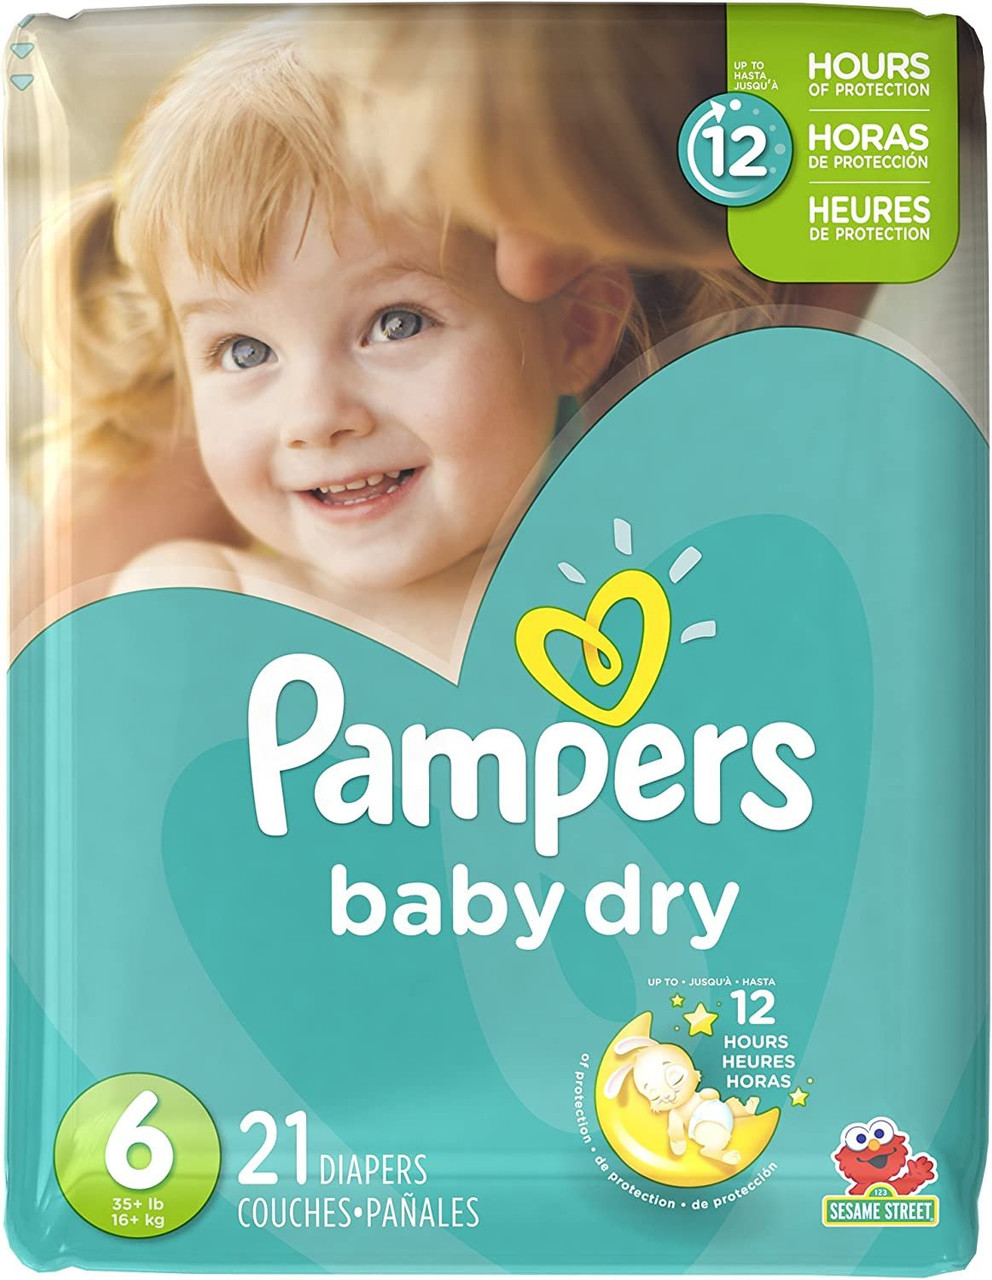 Pampers Baby Dry Diapers Size 6 Jumbo Pack 21 Count, (Pack of 4